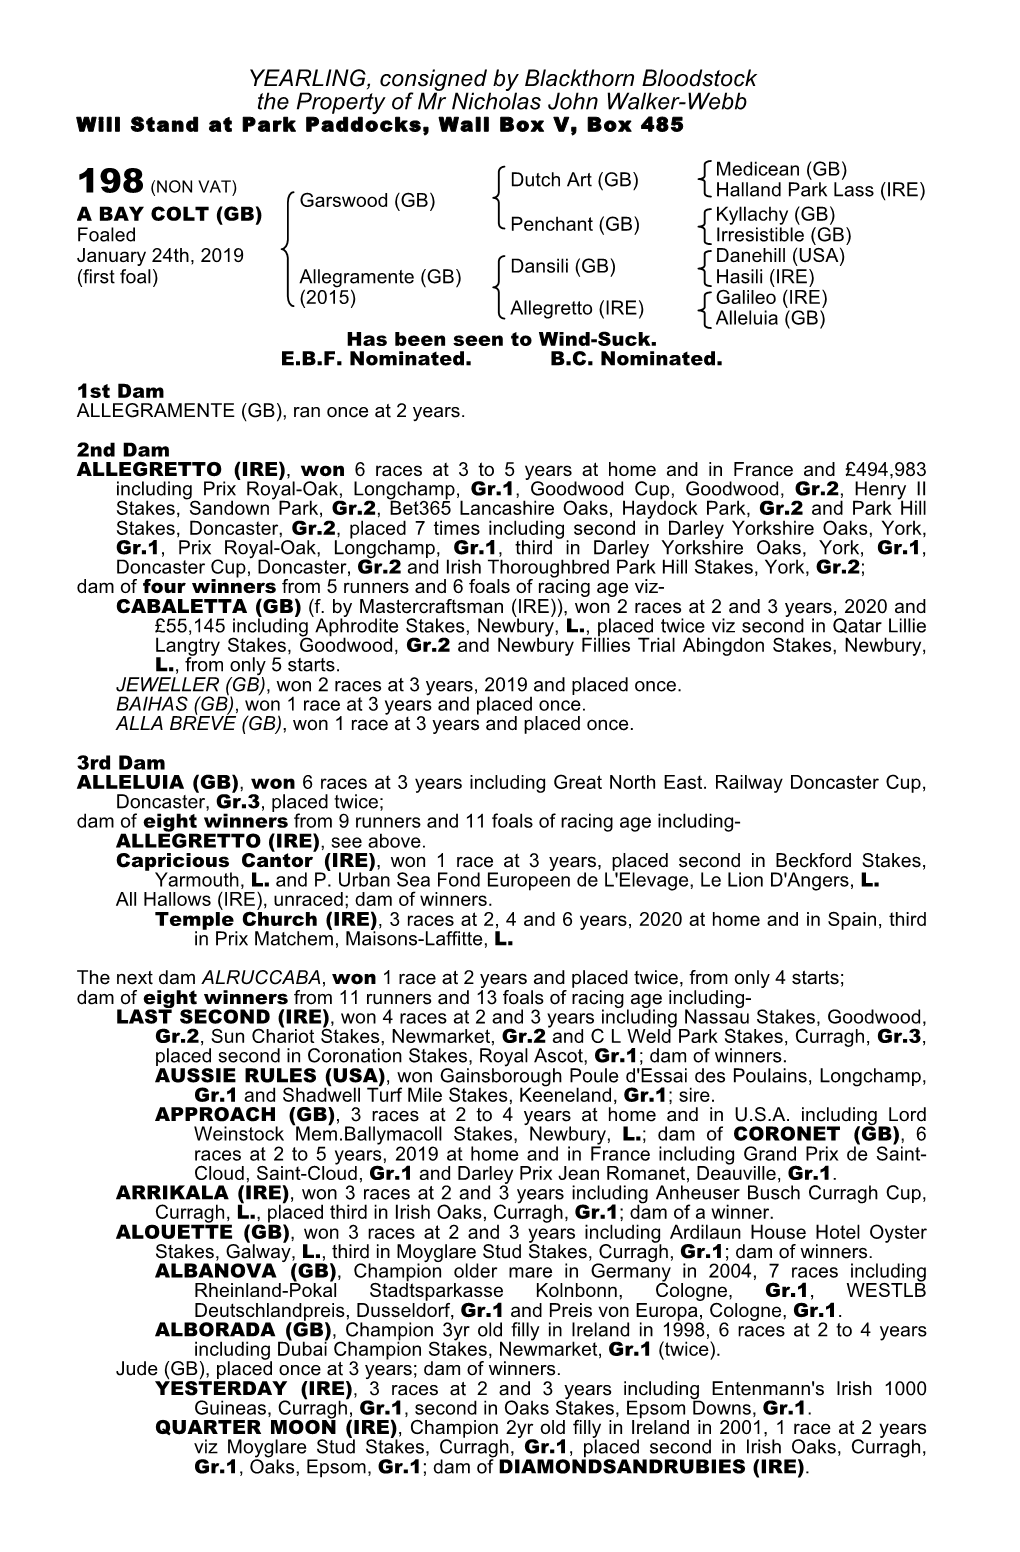 YEARLING, Consigned by Blackthorn Bloodstock the Property of Mr Nicholas John Walker-Webb Will Stand at Park Paddocks, Wall Box V, Box 485